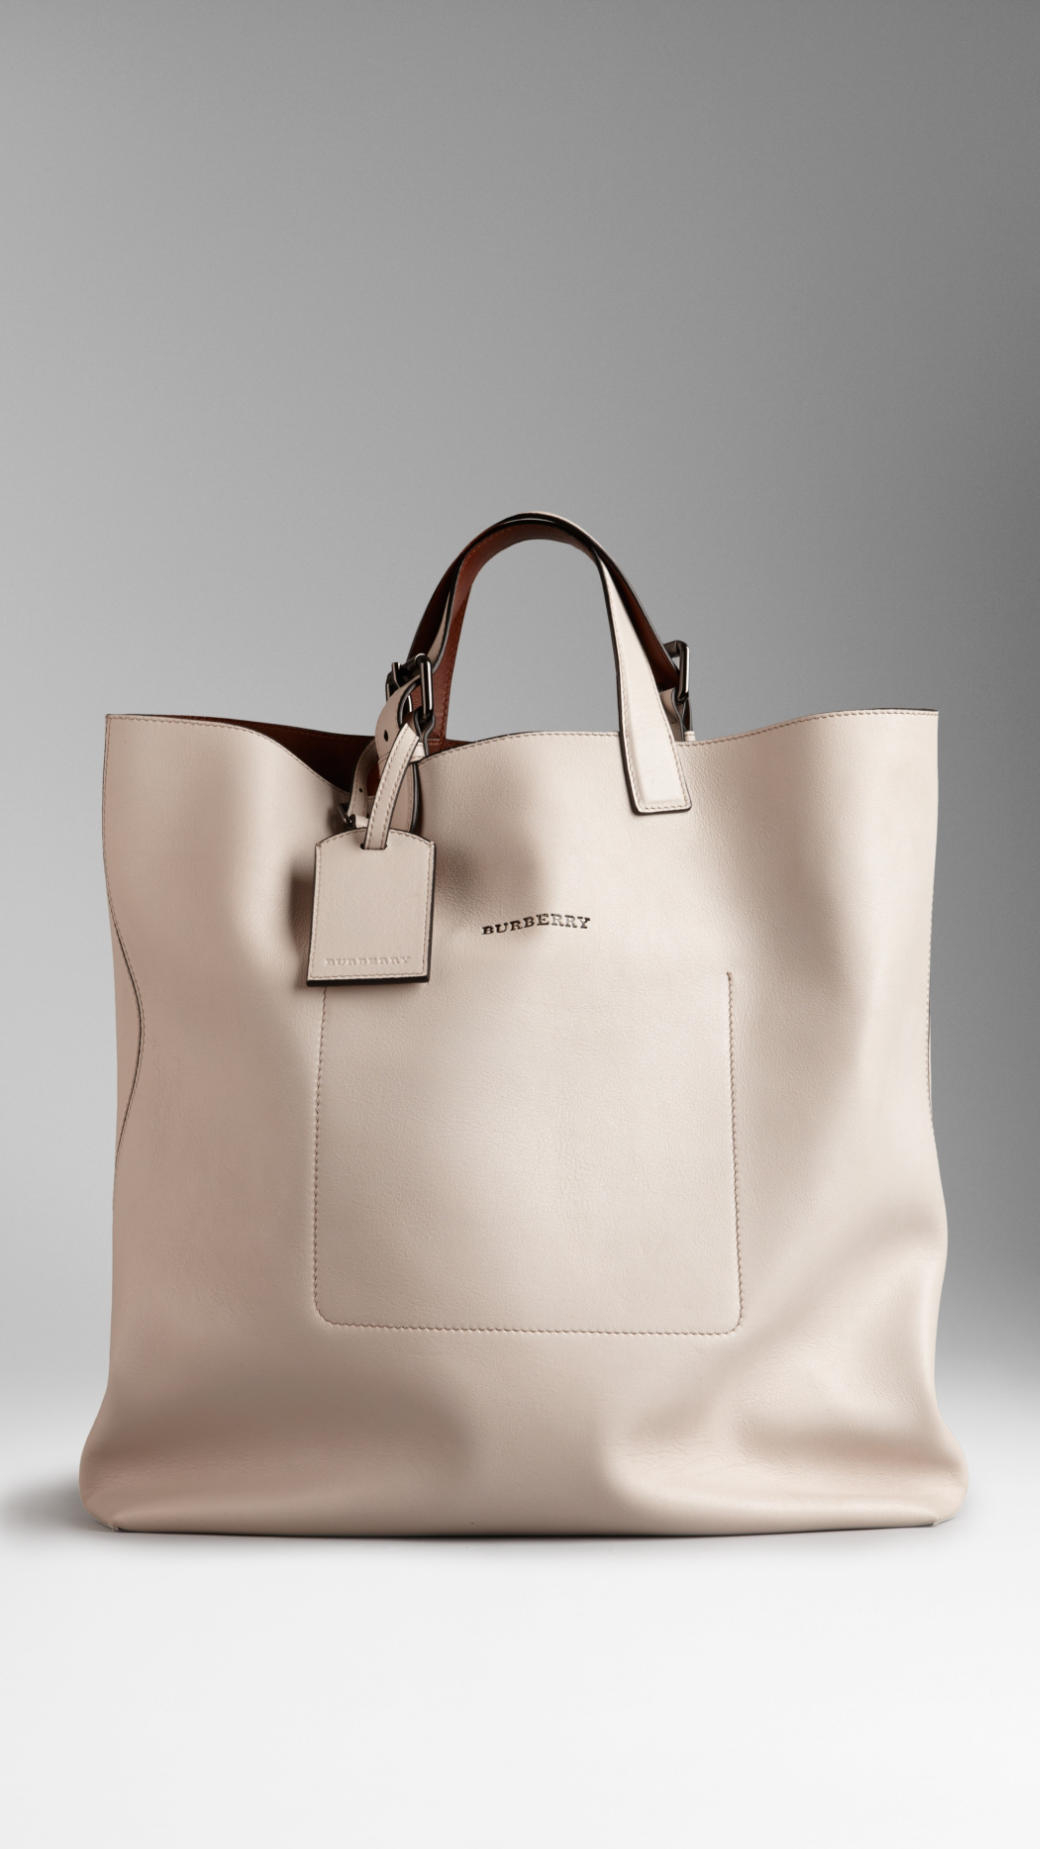 Burberry Large Bonded Leather Portrait Tote Bag in Beige (stone) | Lyst